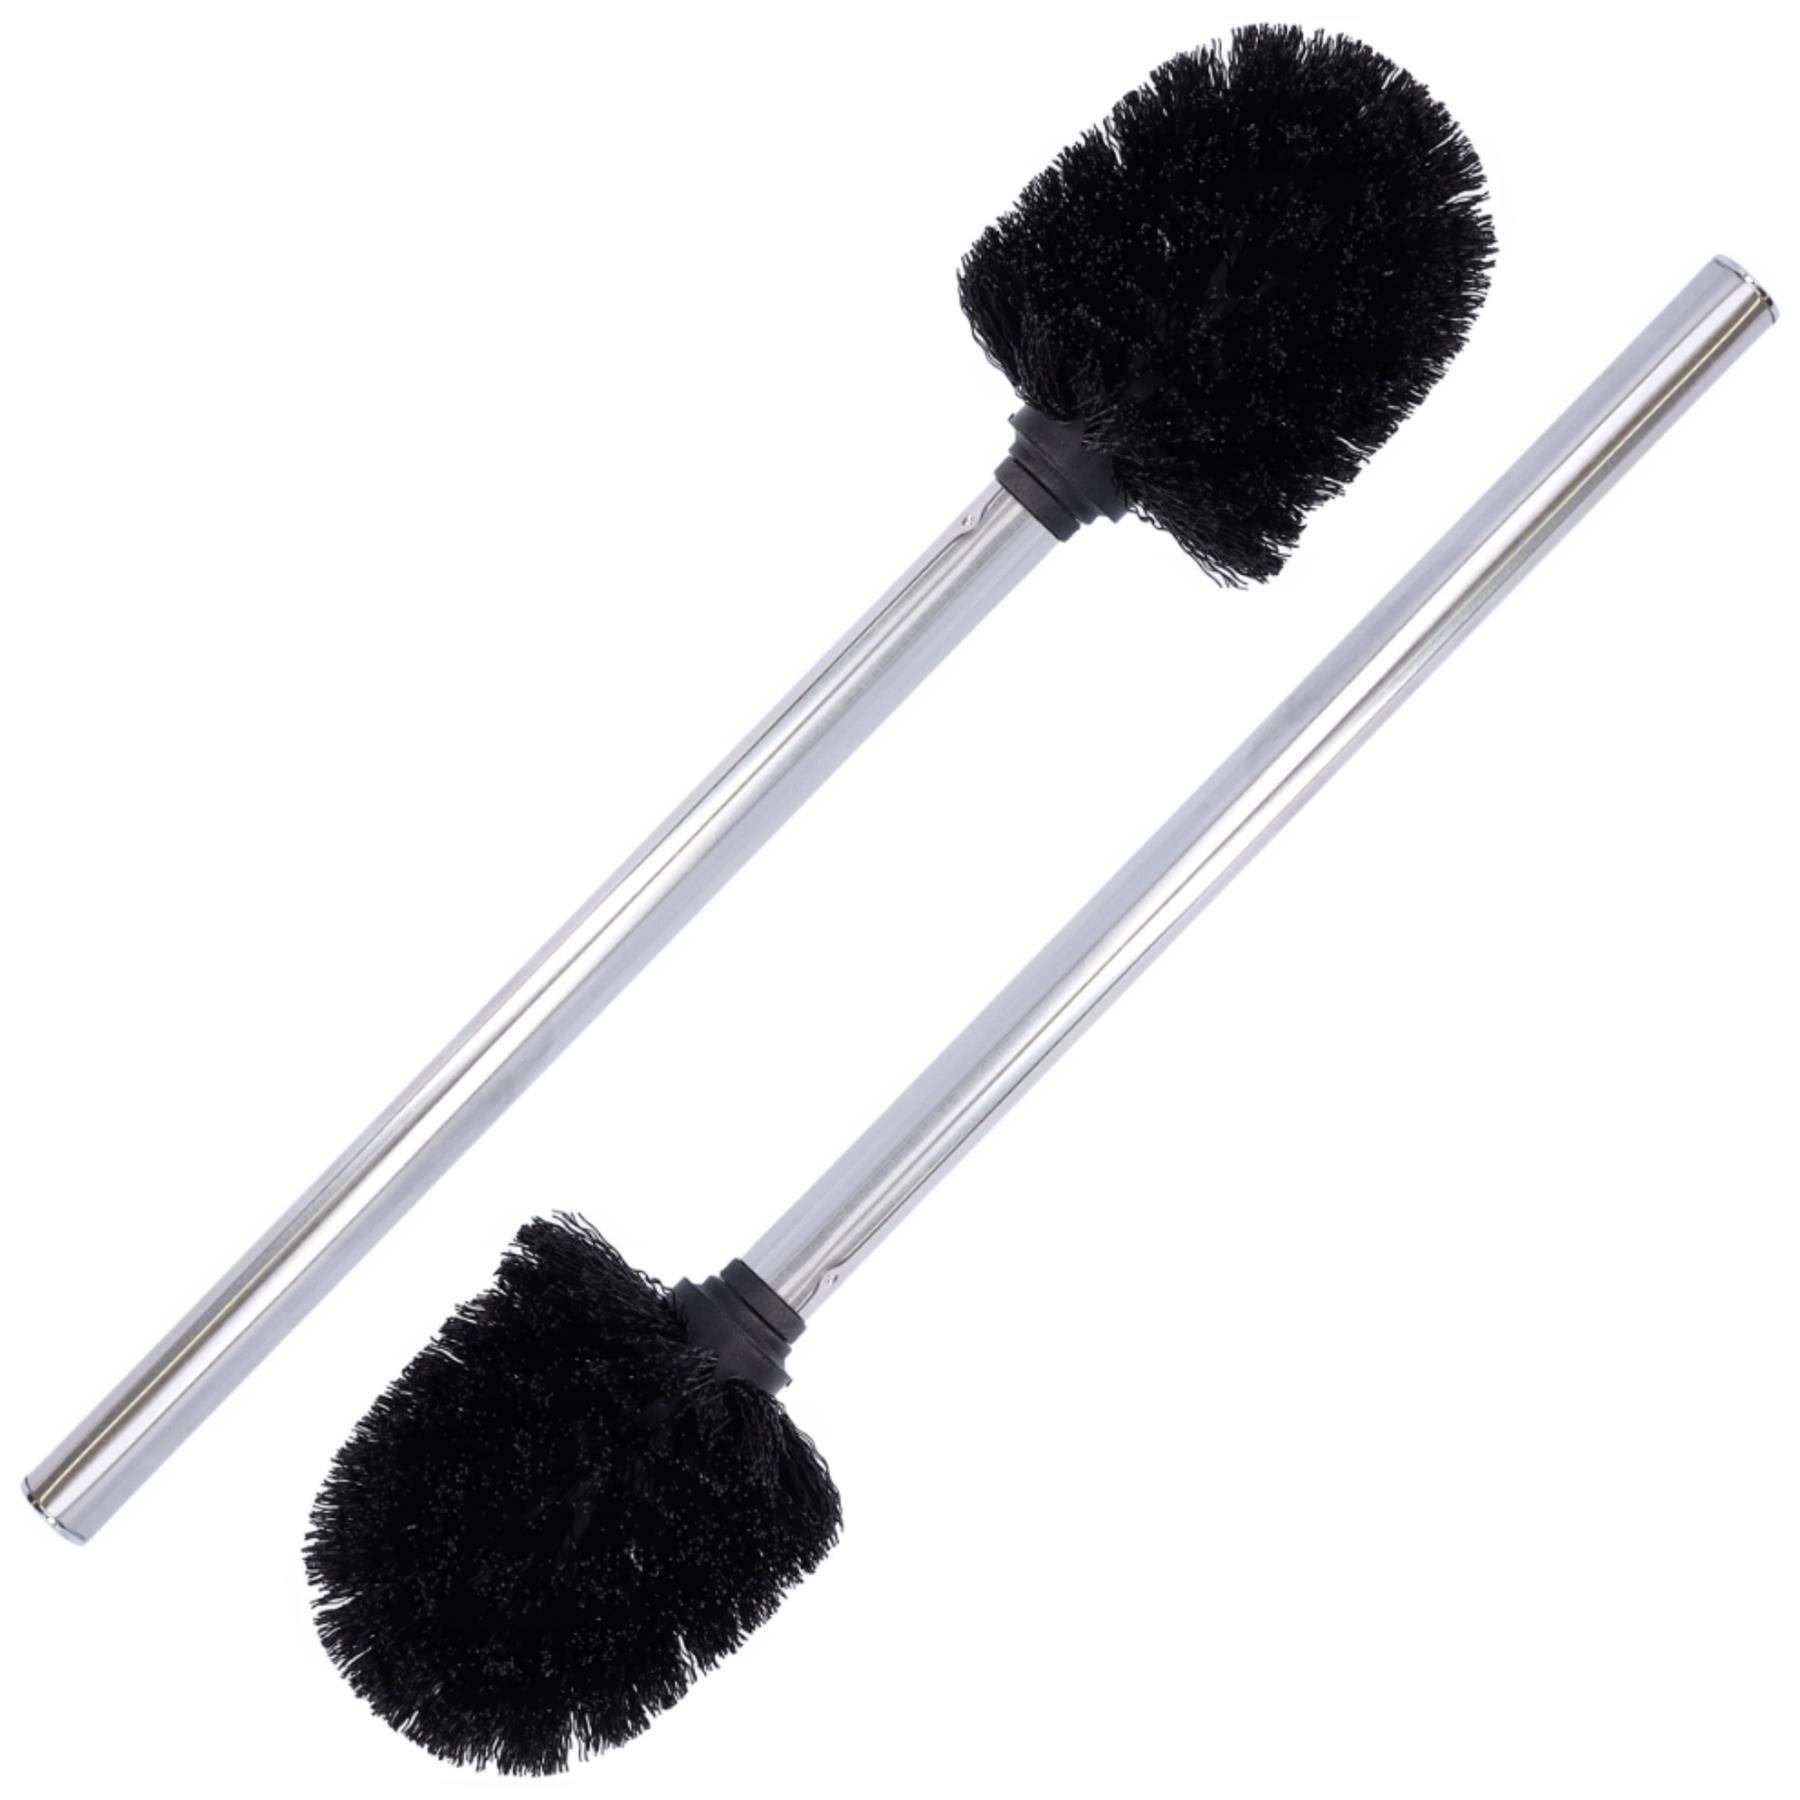 Toilet Brush Set of 2 by GEEZY - The Magic Toy Shop